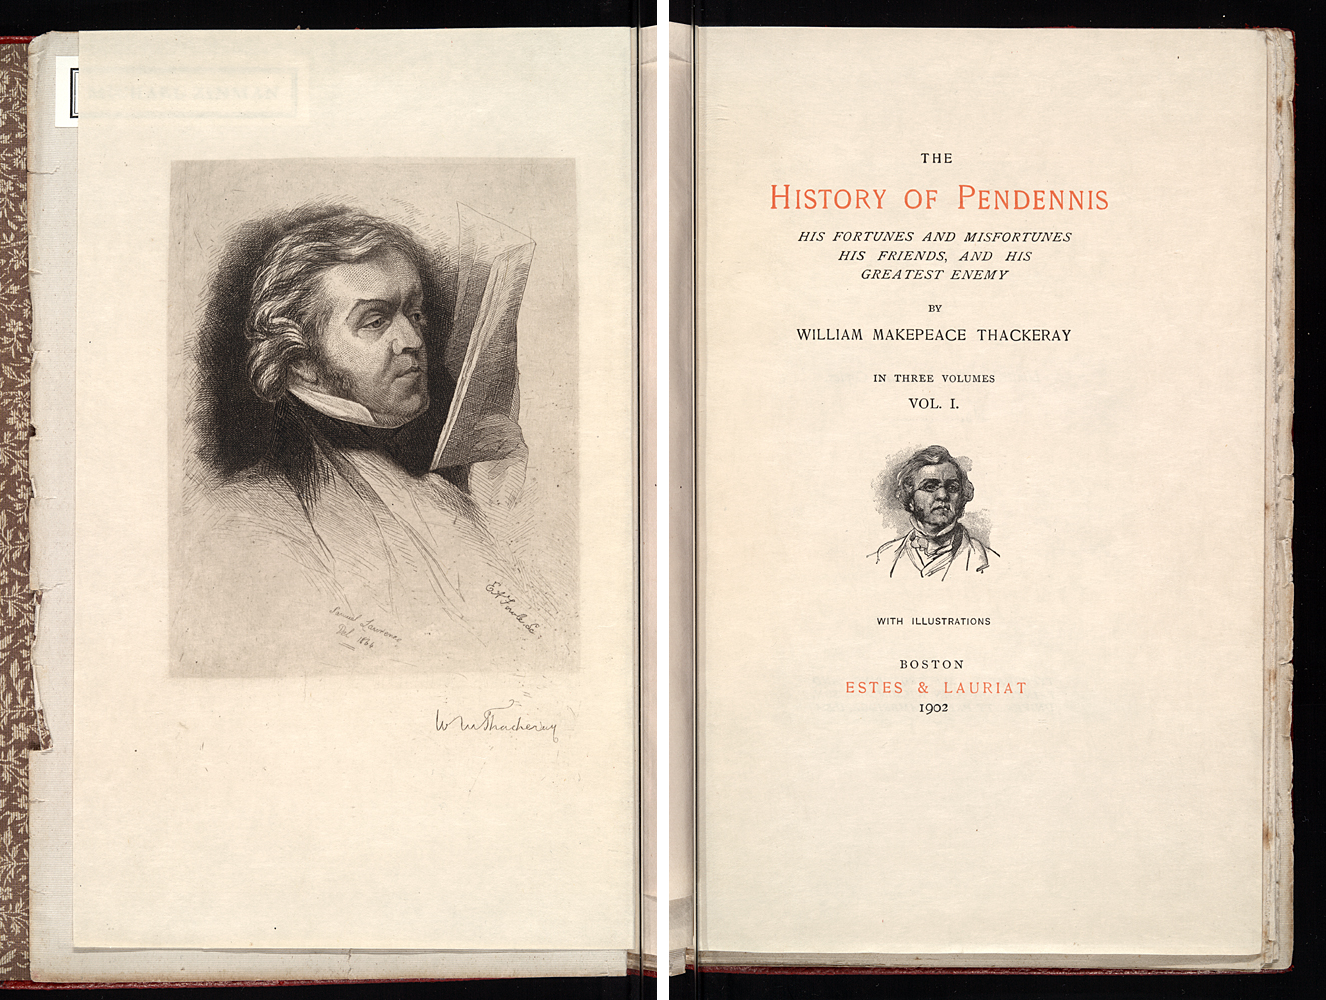 Interior cover of The History of Pendennis featuring Small and Large Illustrations of author William Makepeace Thackery